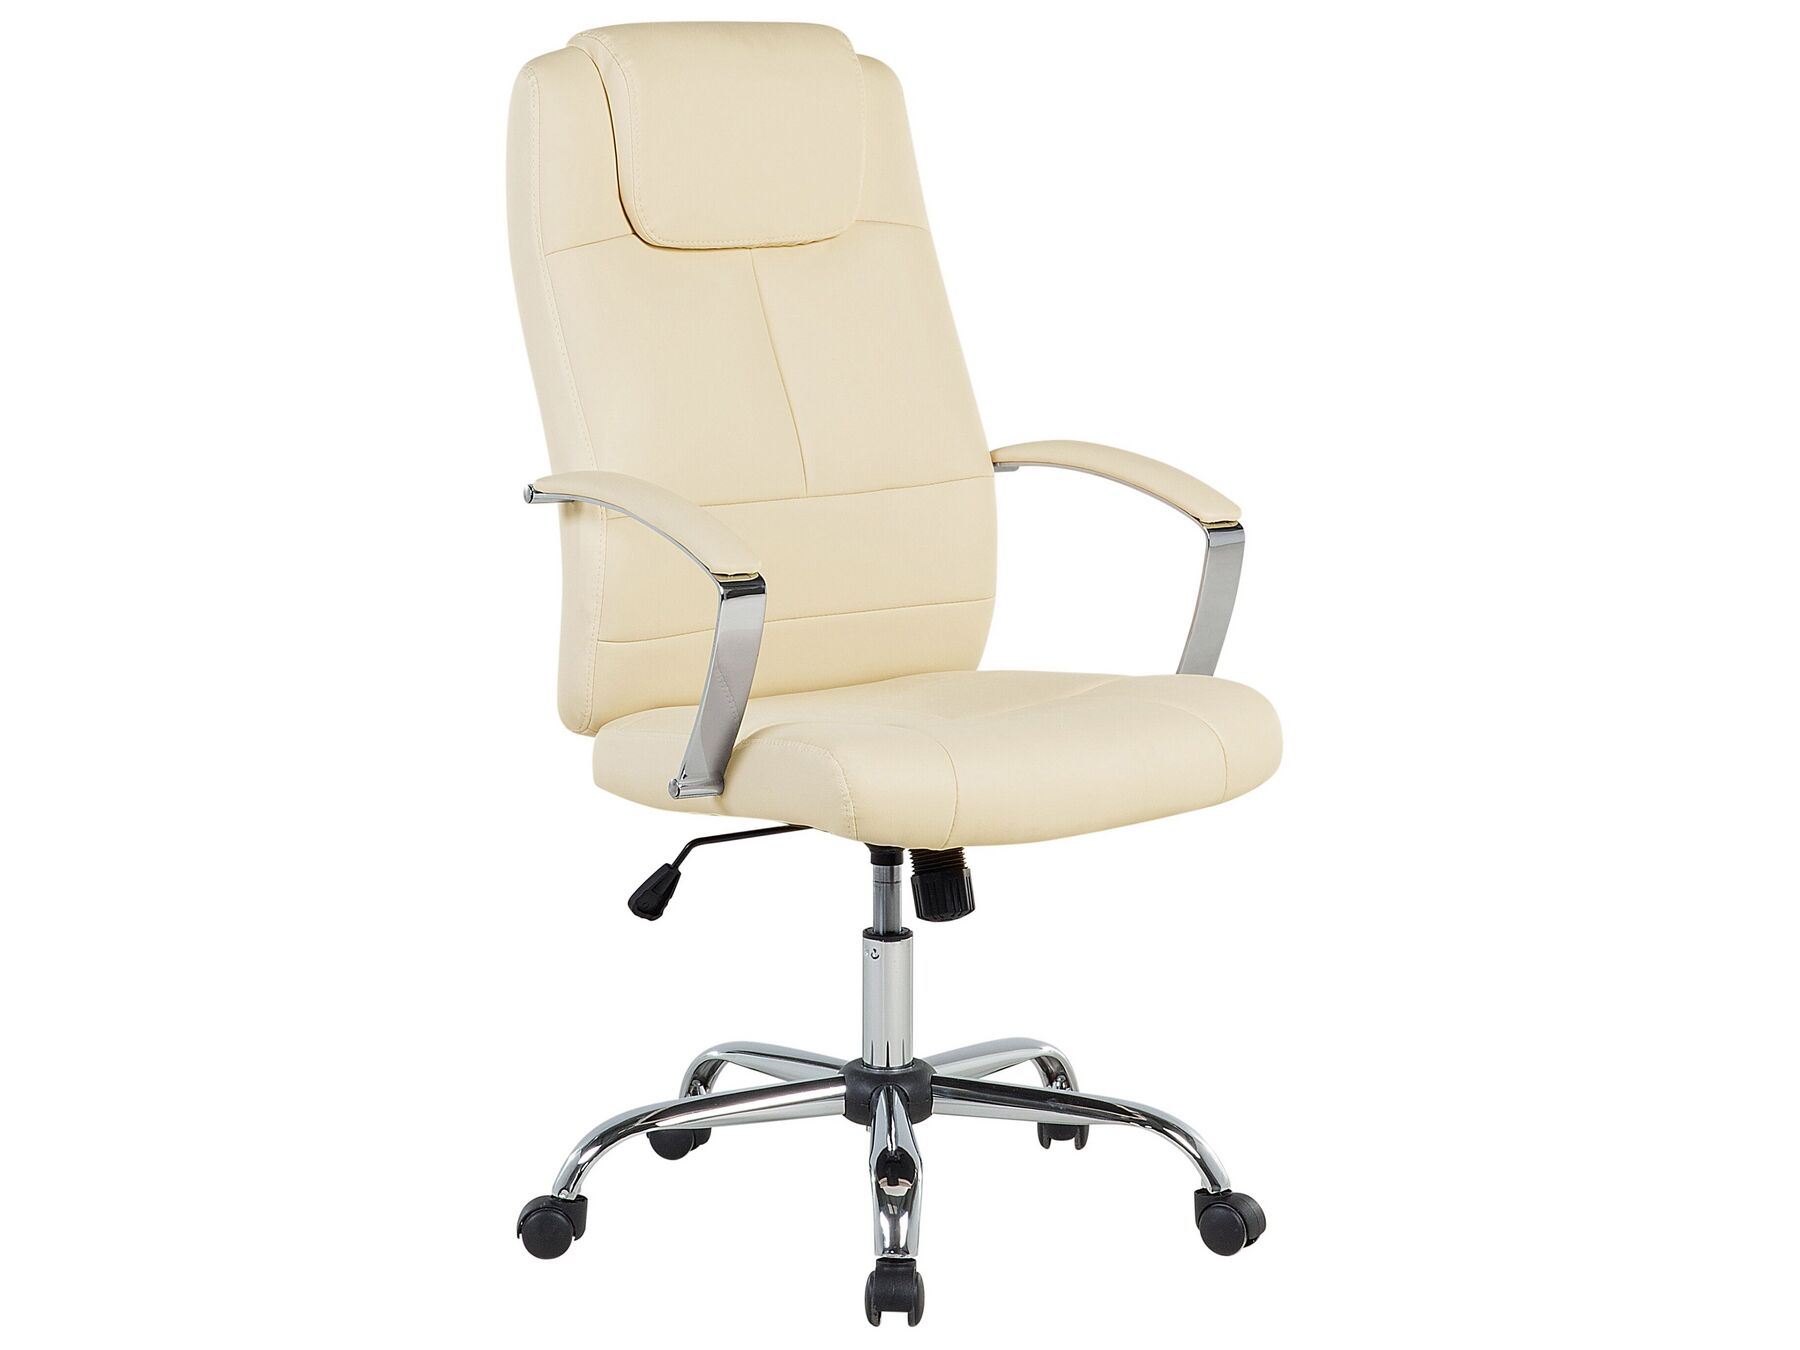 Faux Leather Executive Chair Beige WINNER_762237